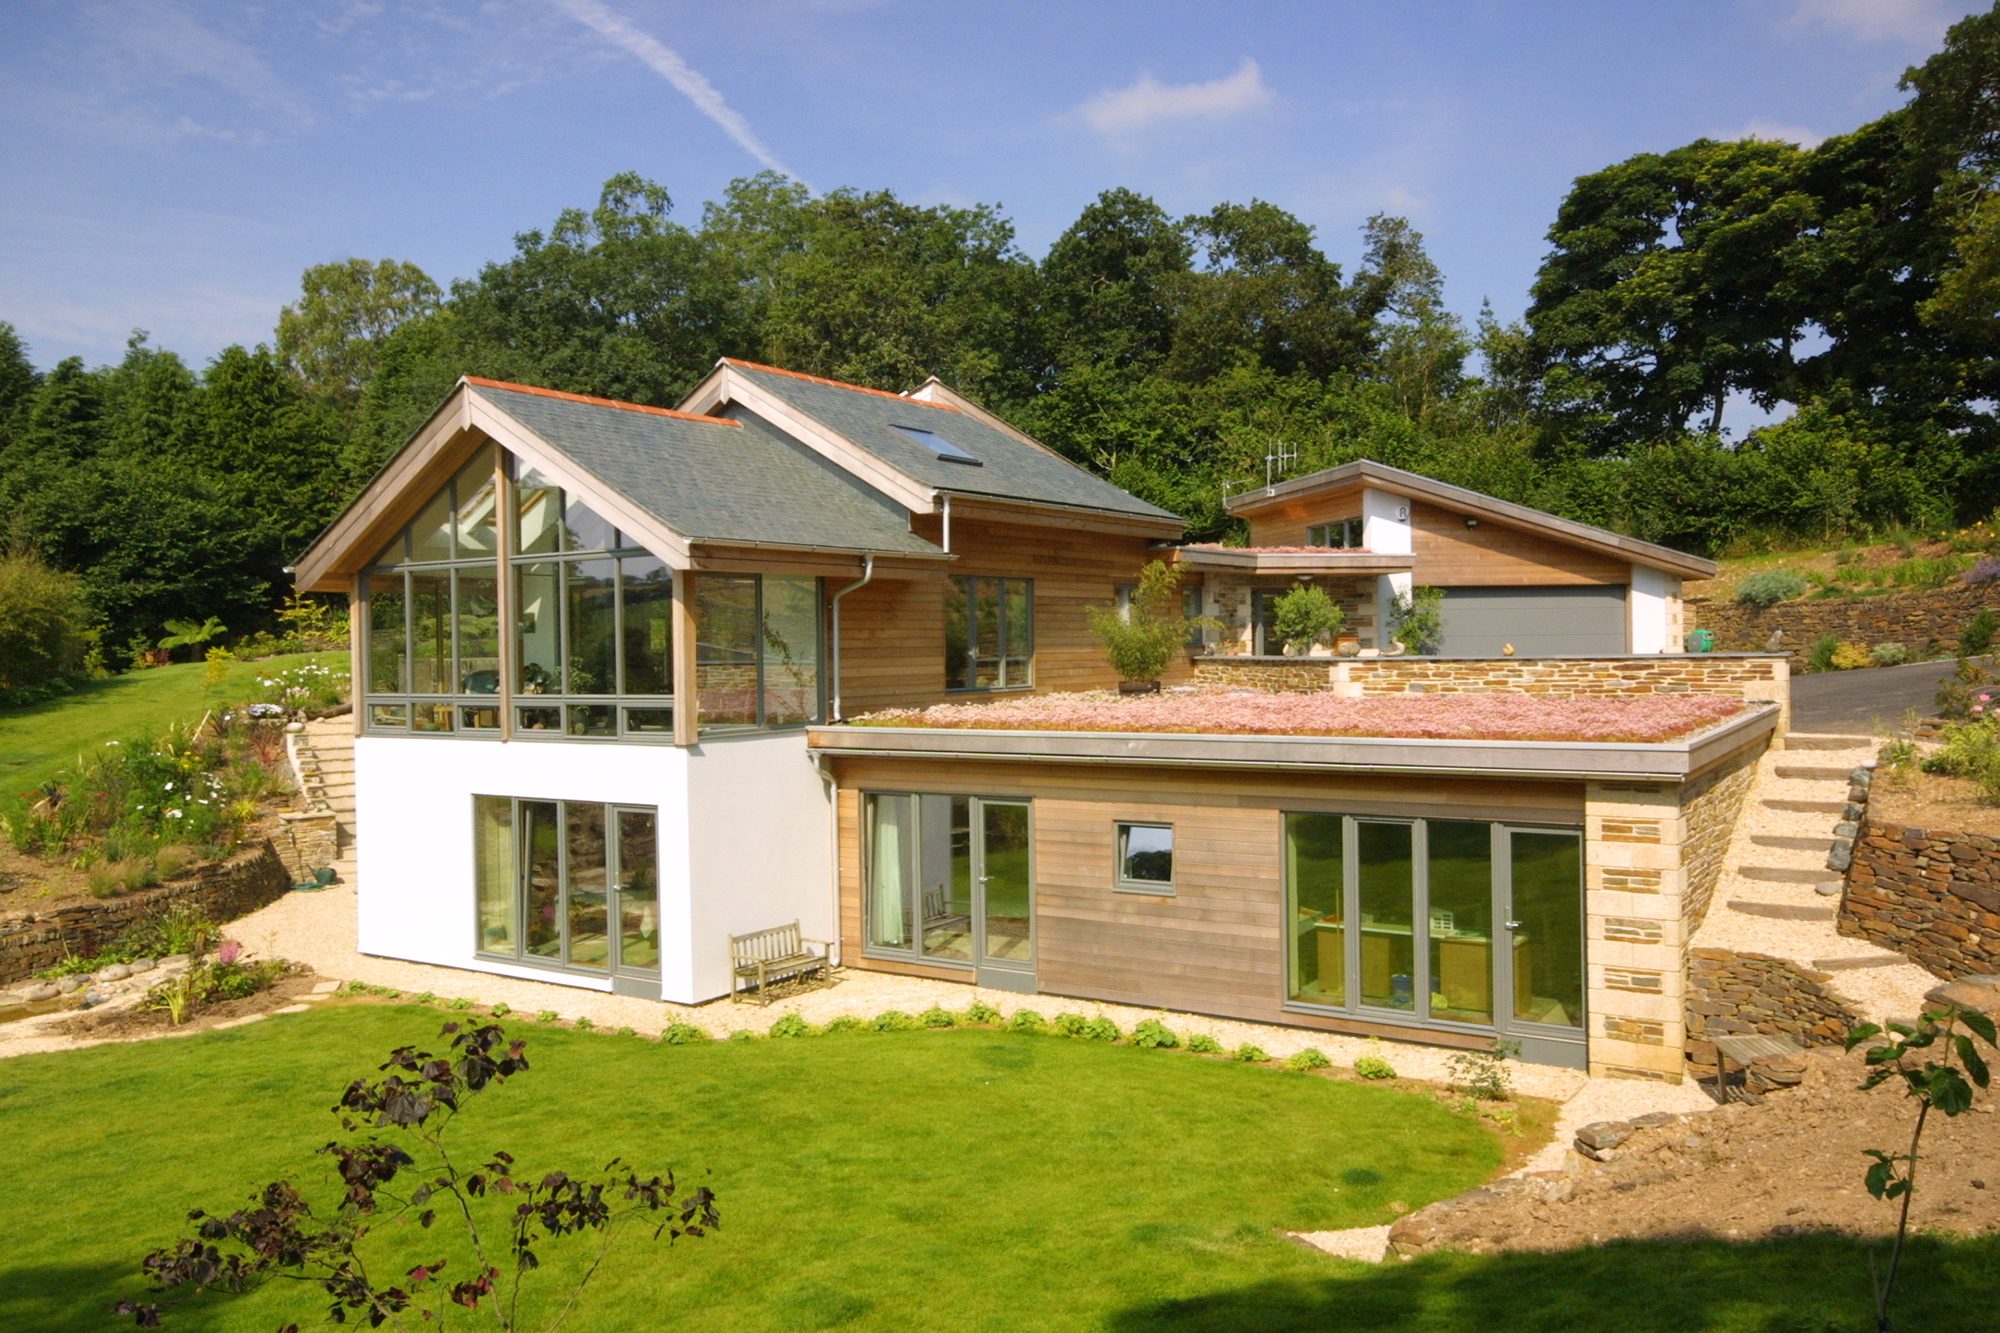 How to build your own house: a self build beginner's guide